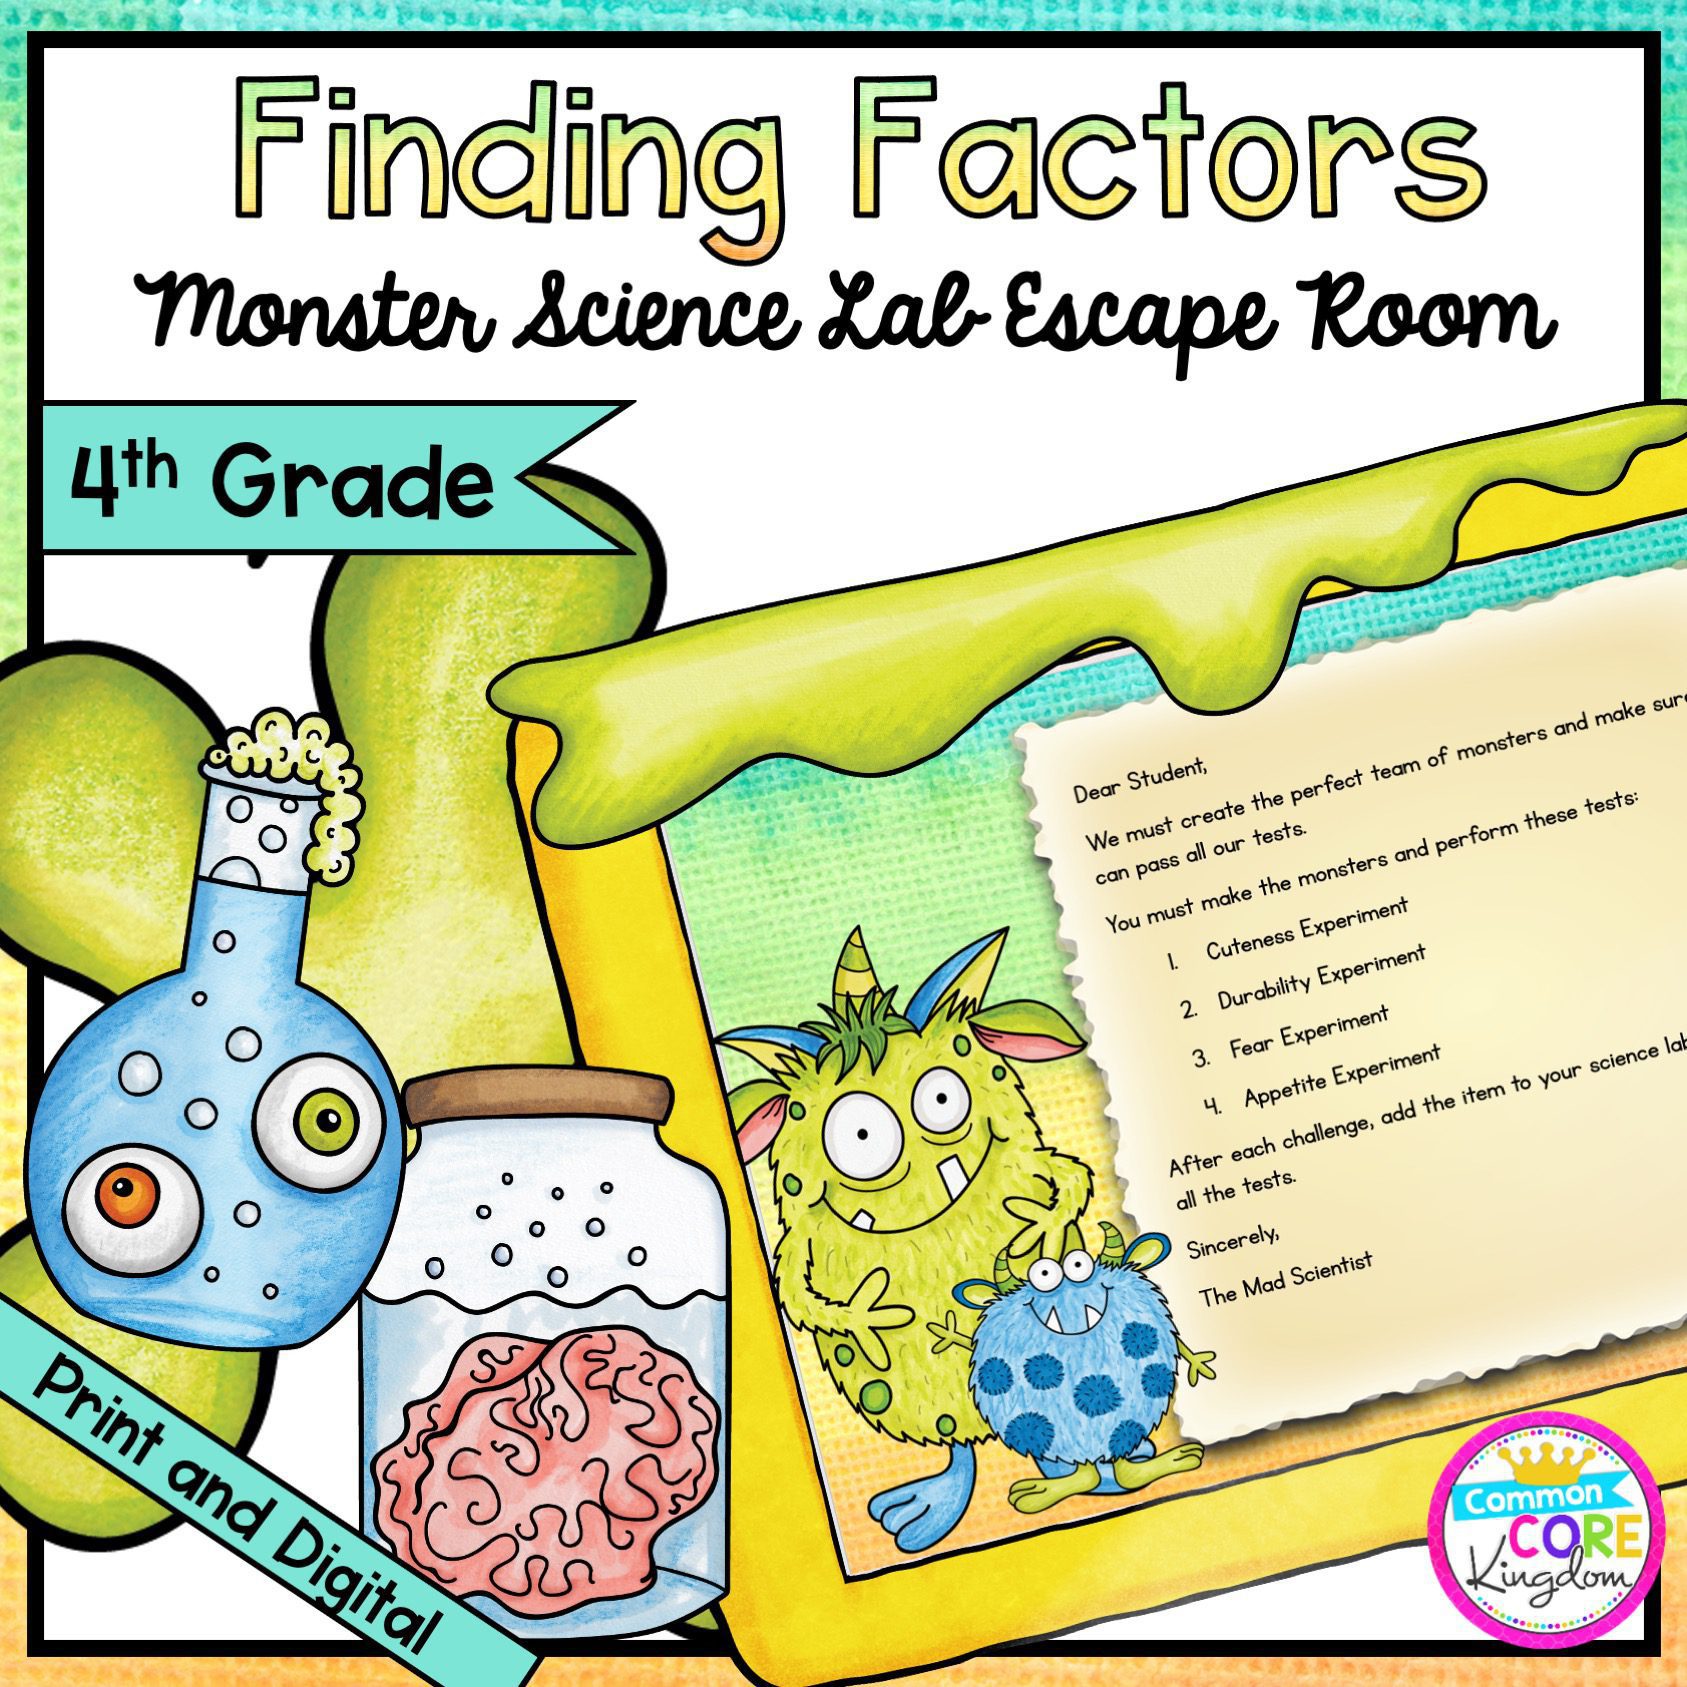 Finding Factors - Monster Science Escape Room for 4th Grade in Digital & Printable Format